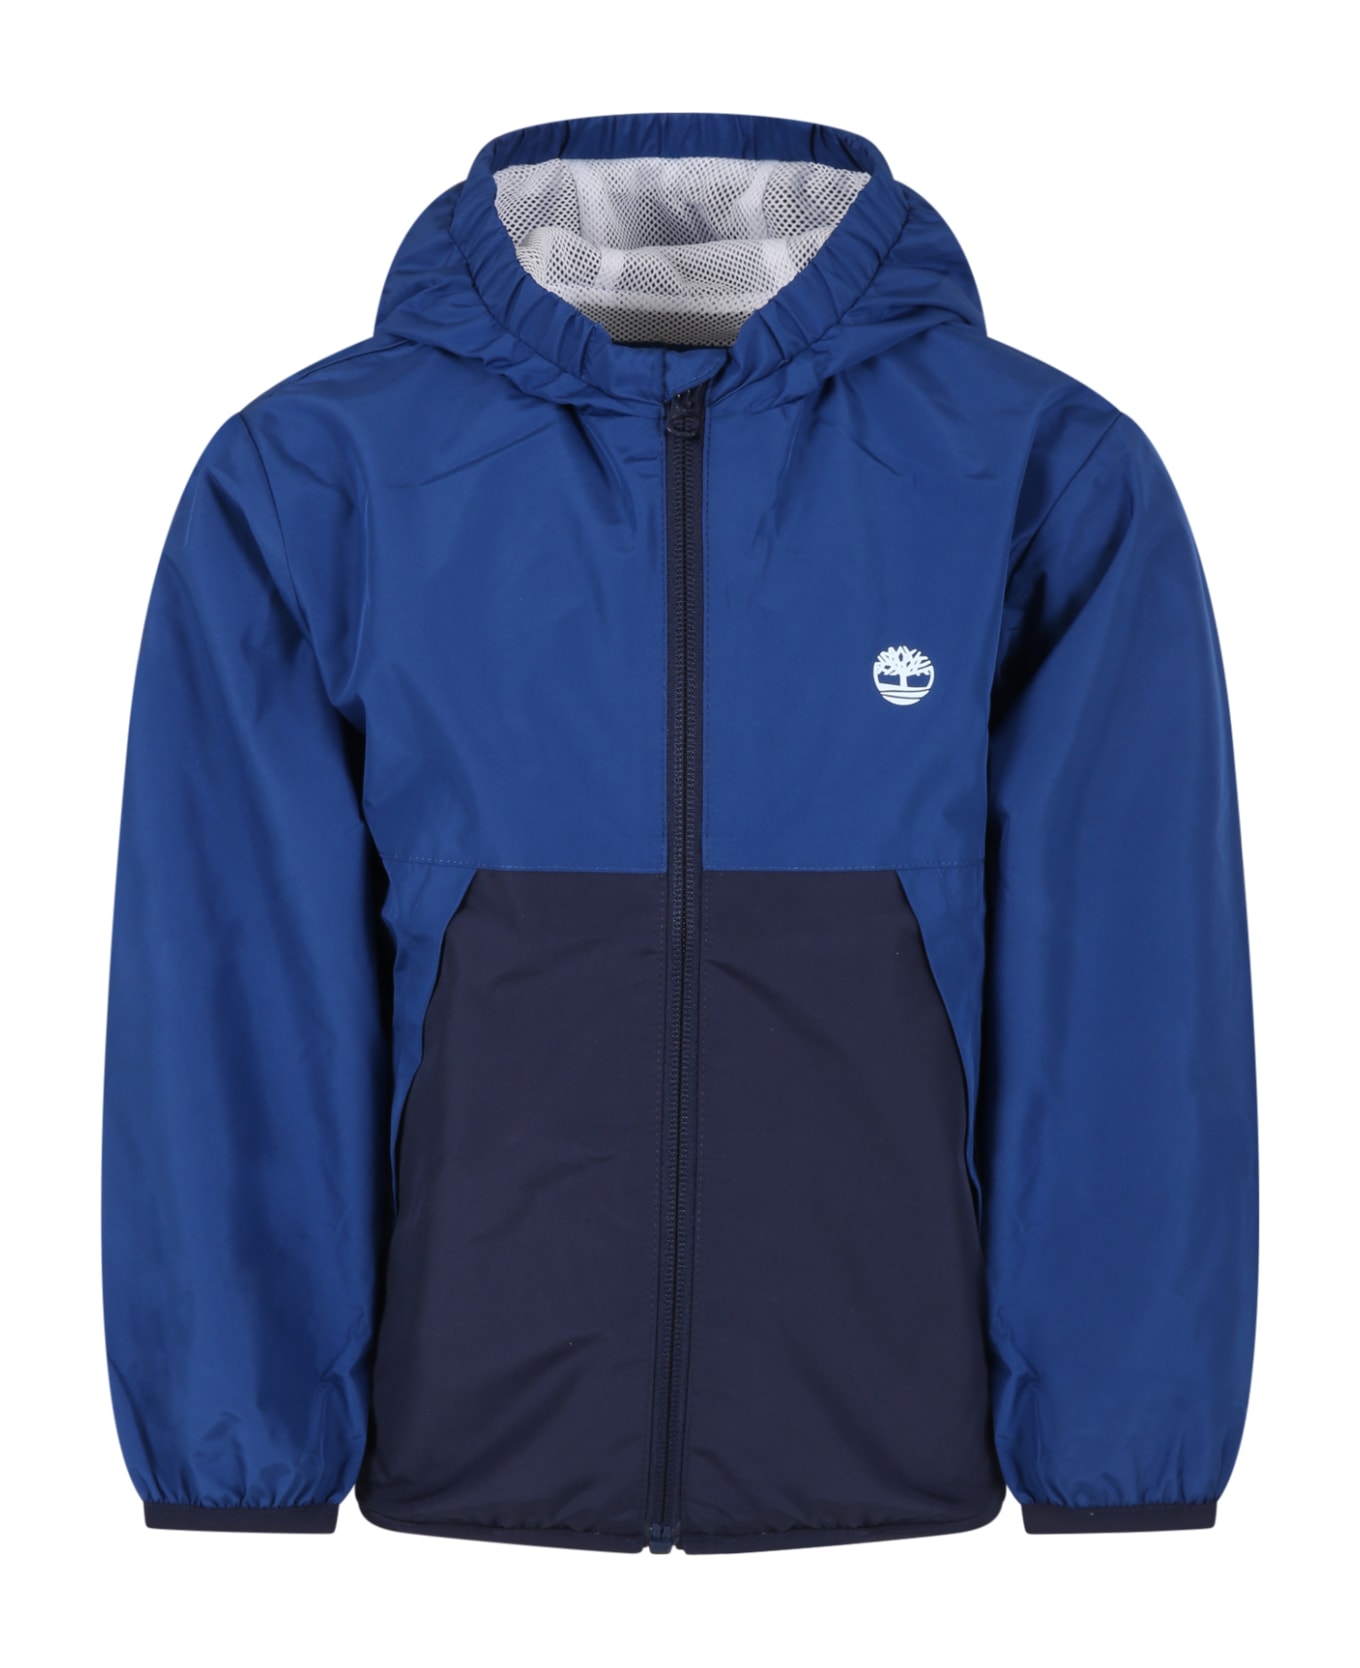 Timberland Blue Windbreaker For Boy With White Logo - Blue